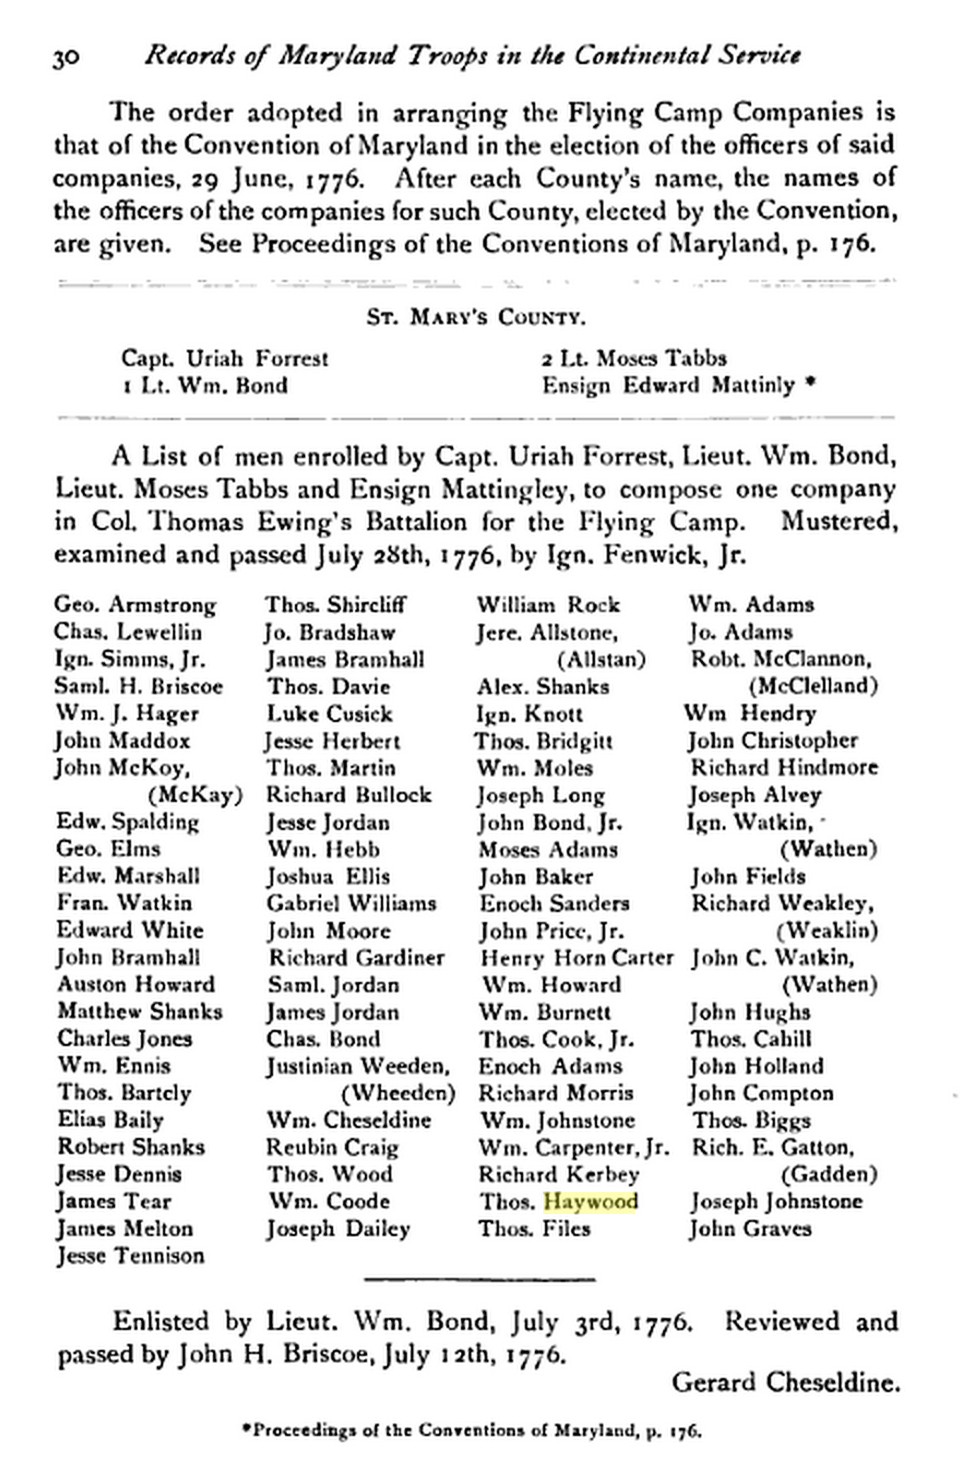 Muster roll of Maryland Militia including Thomas Haywood